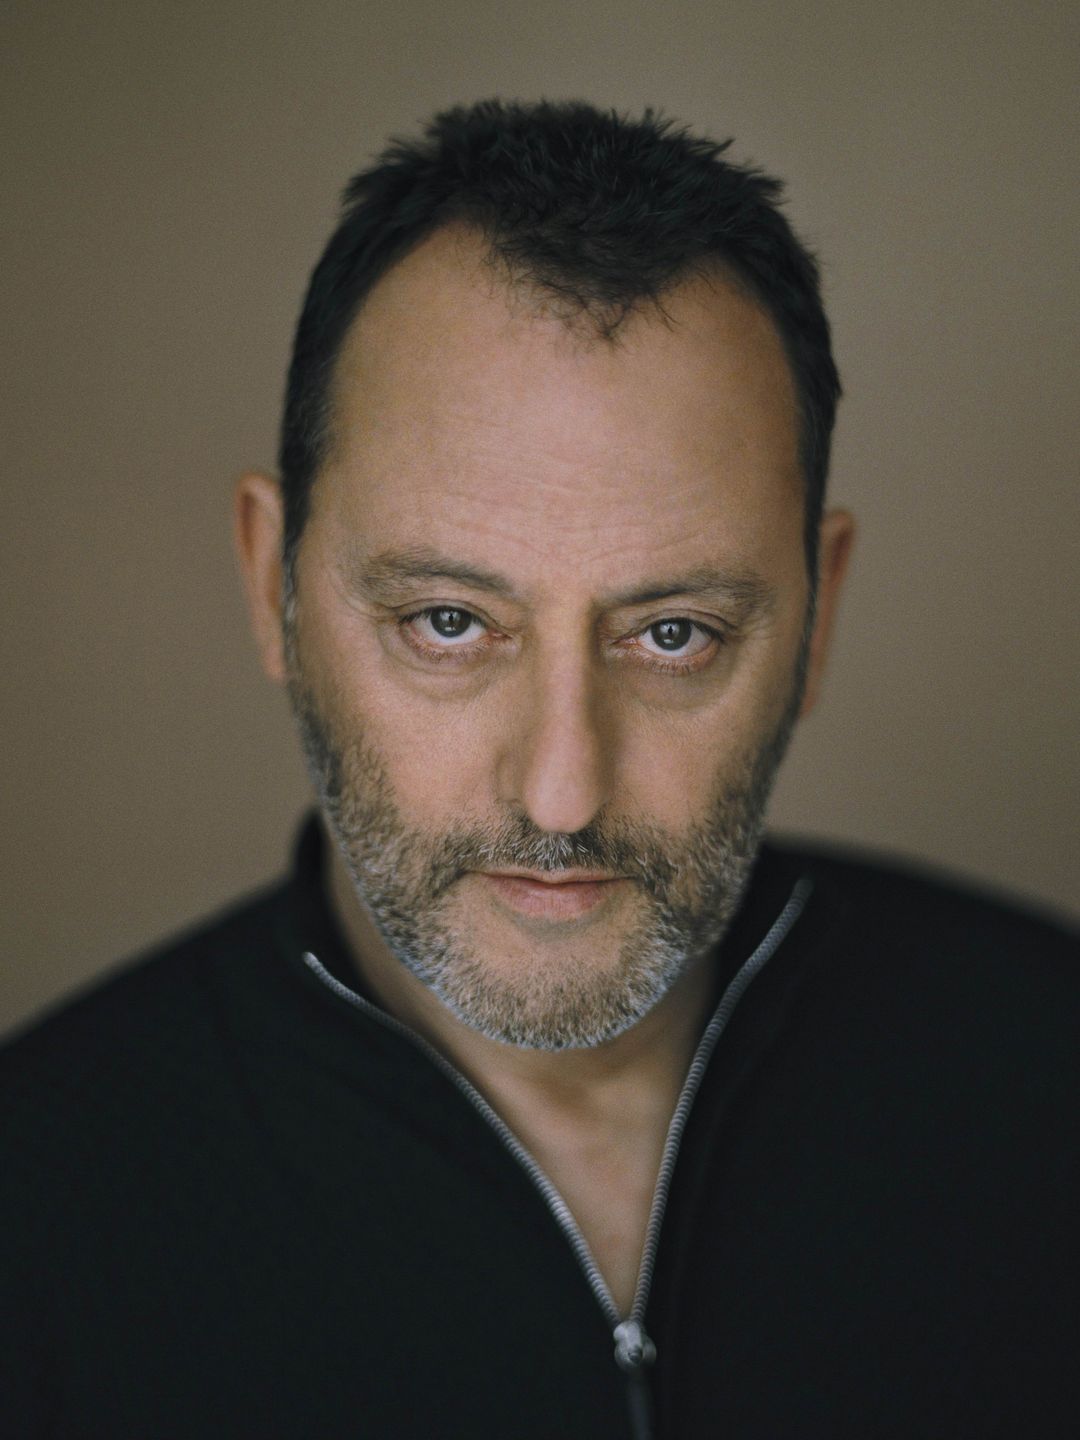 Jean Reno does he have a wife